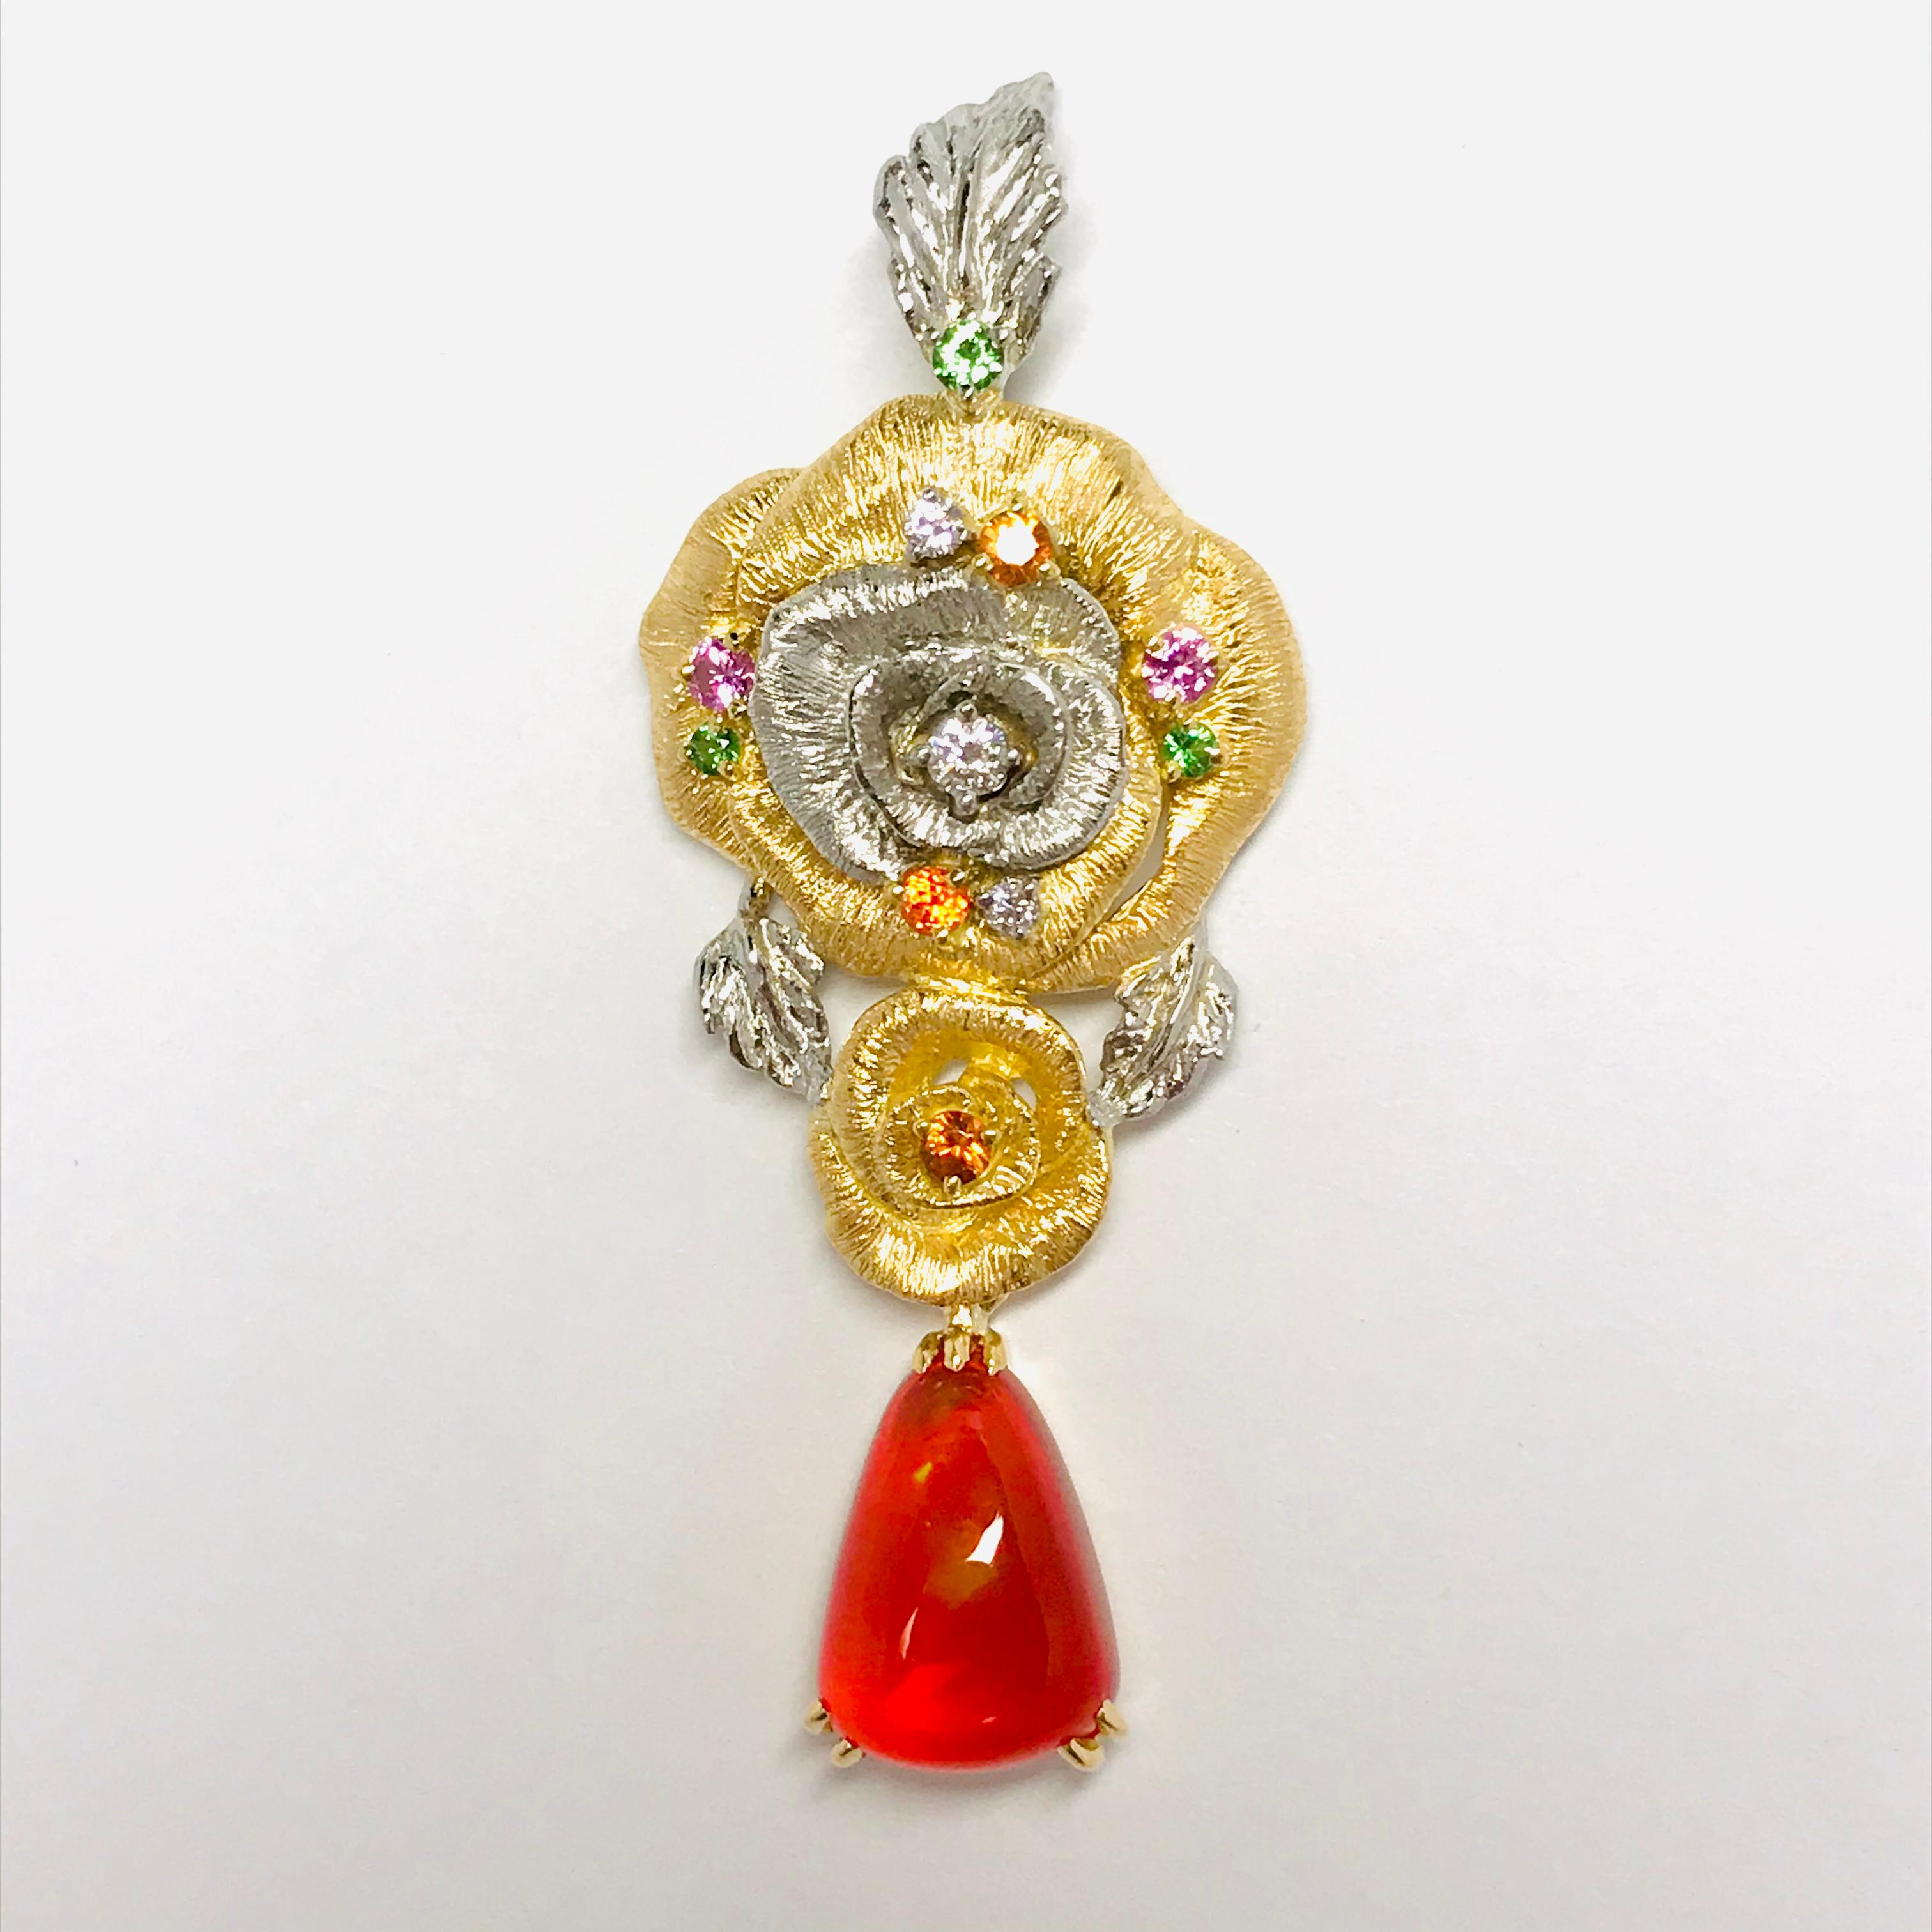 Matsuzaki K18 Gold Platinum Rose Flower 3.02 Carat Fire Opal Pendant Necklace In New Condition For Sale In Tokyo, JP